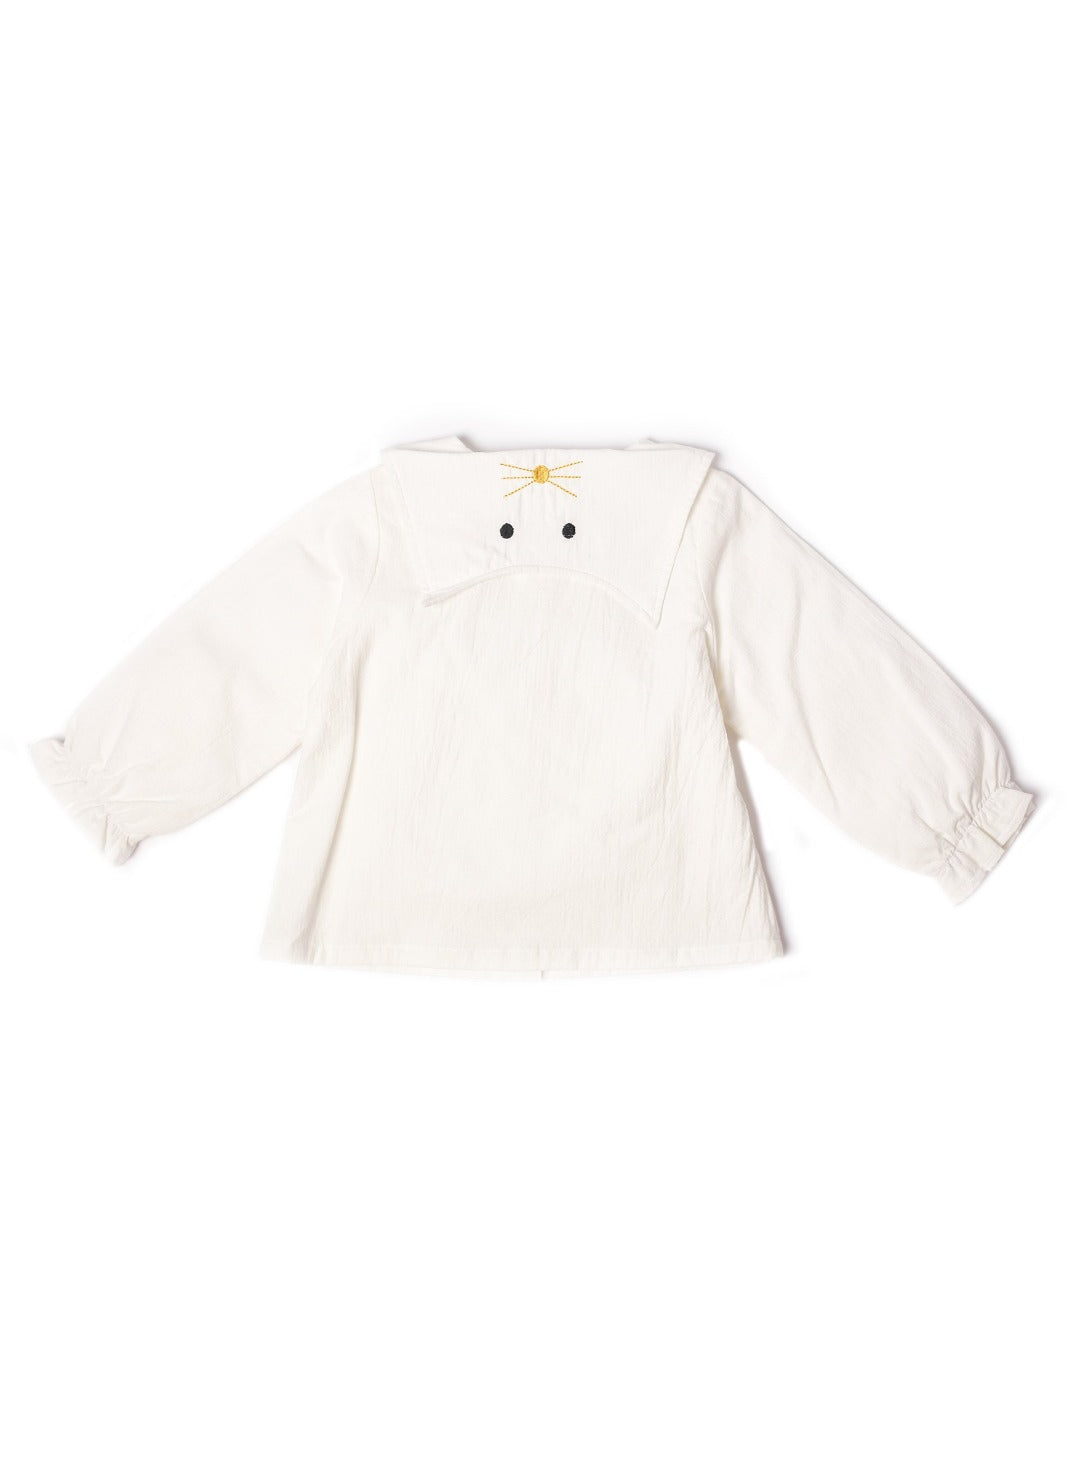 cloud white long sleeve top with scallop collar